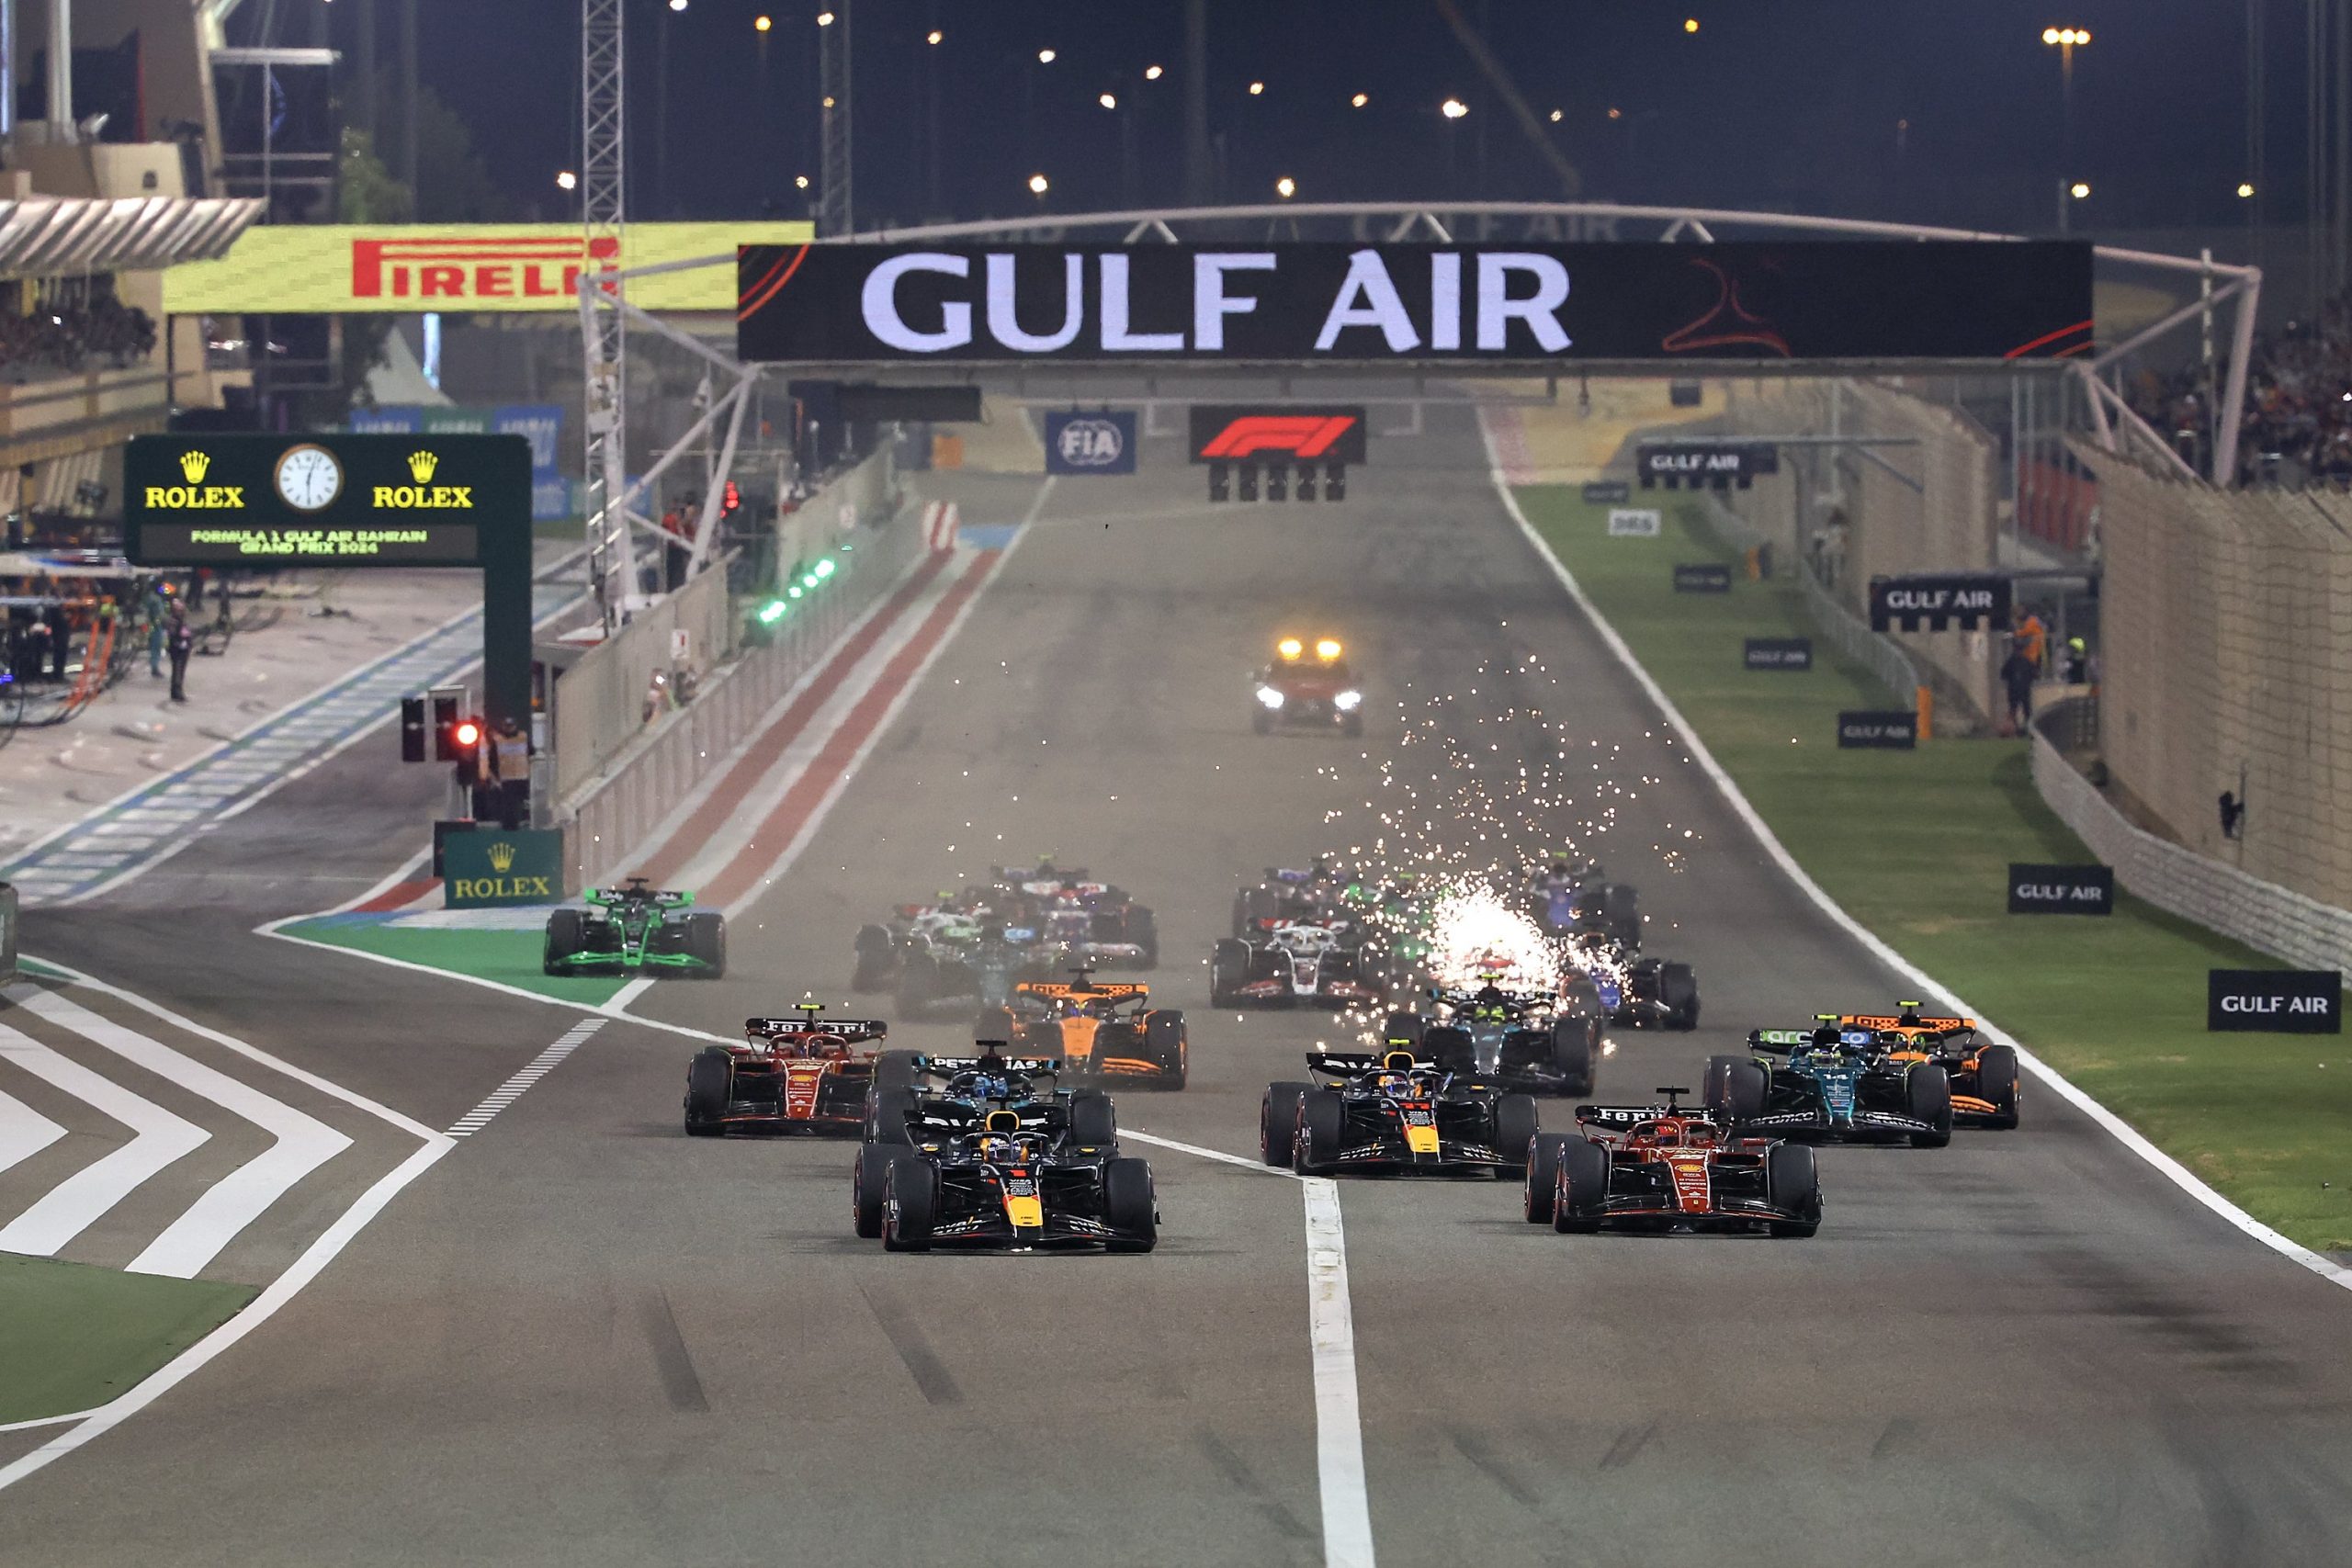 The race start during the F1 Grand Prix of Bahrain